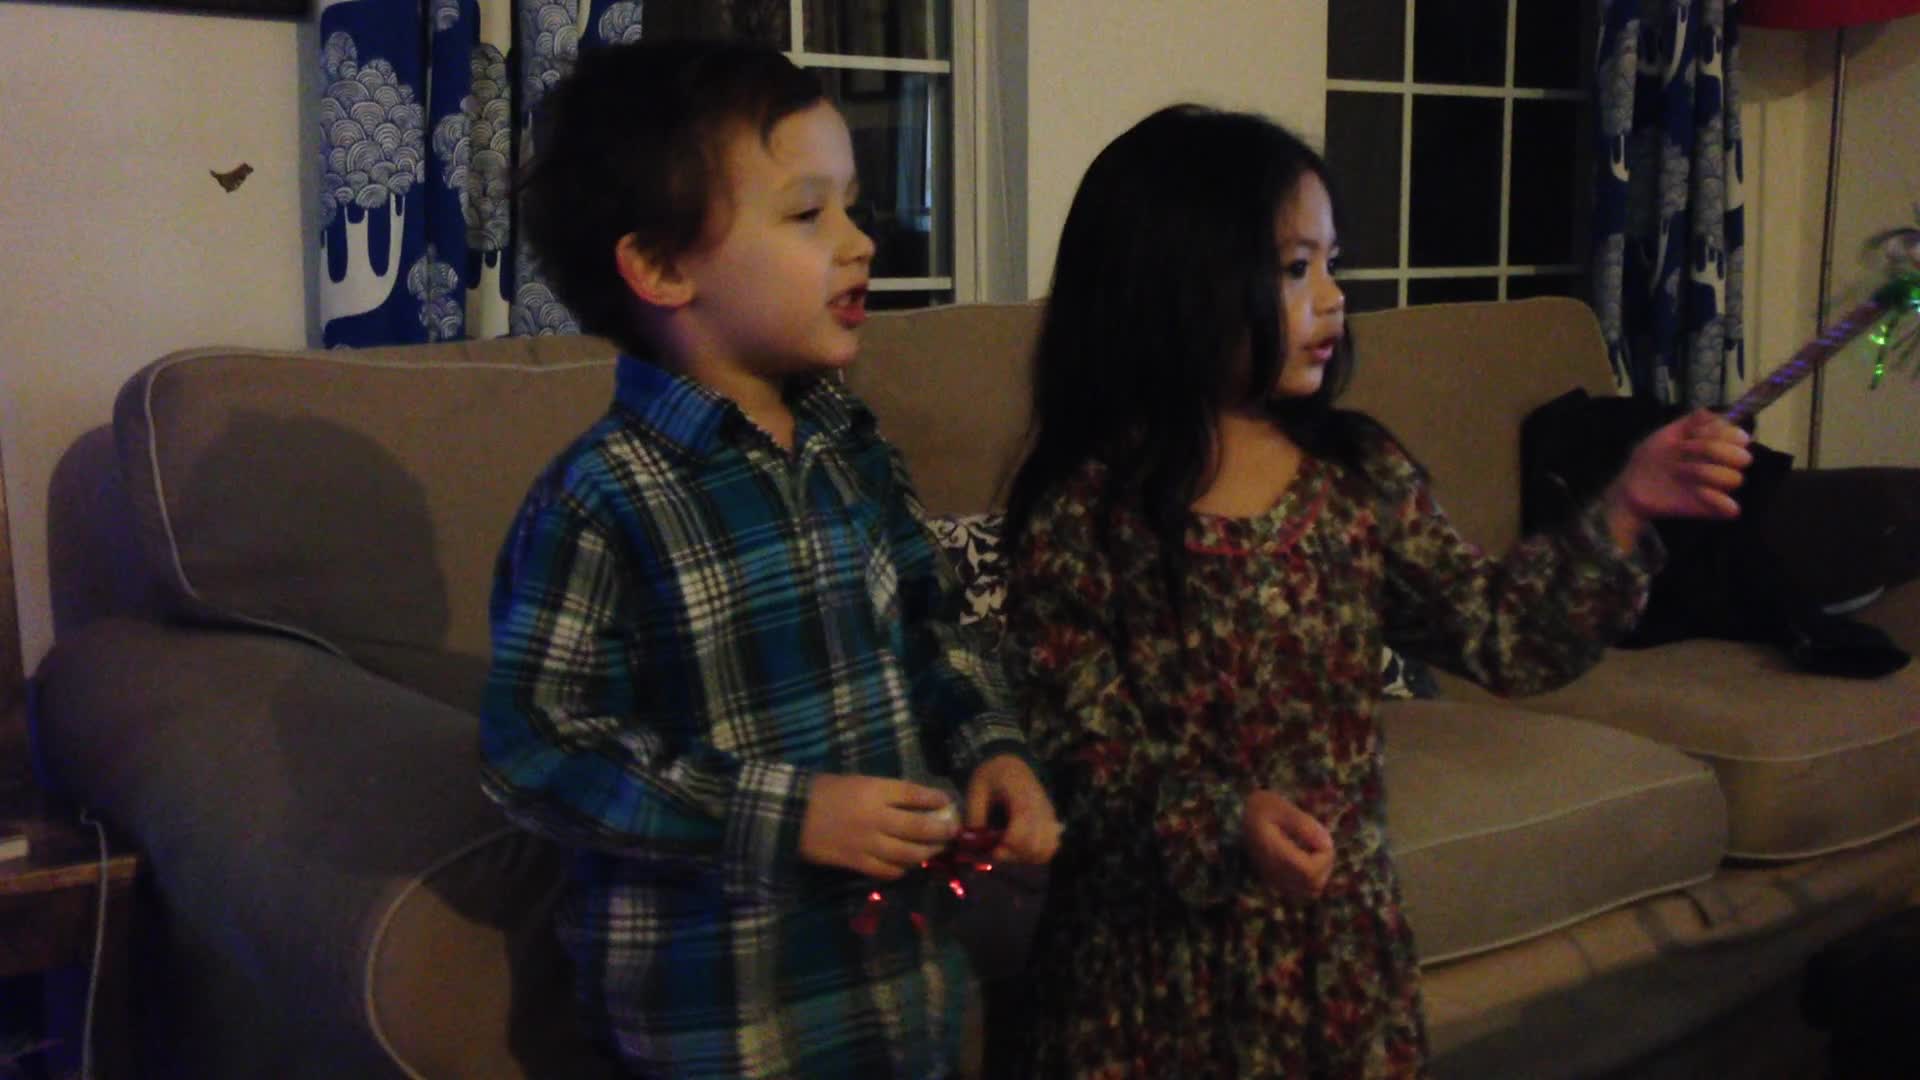 two young children standing in front of a couch holding nintendo wii controllers